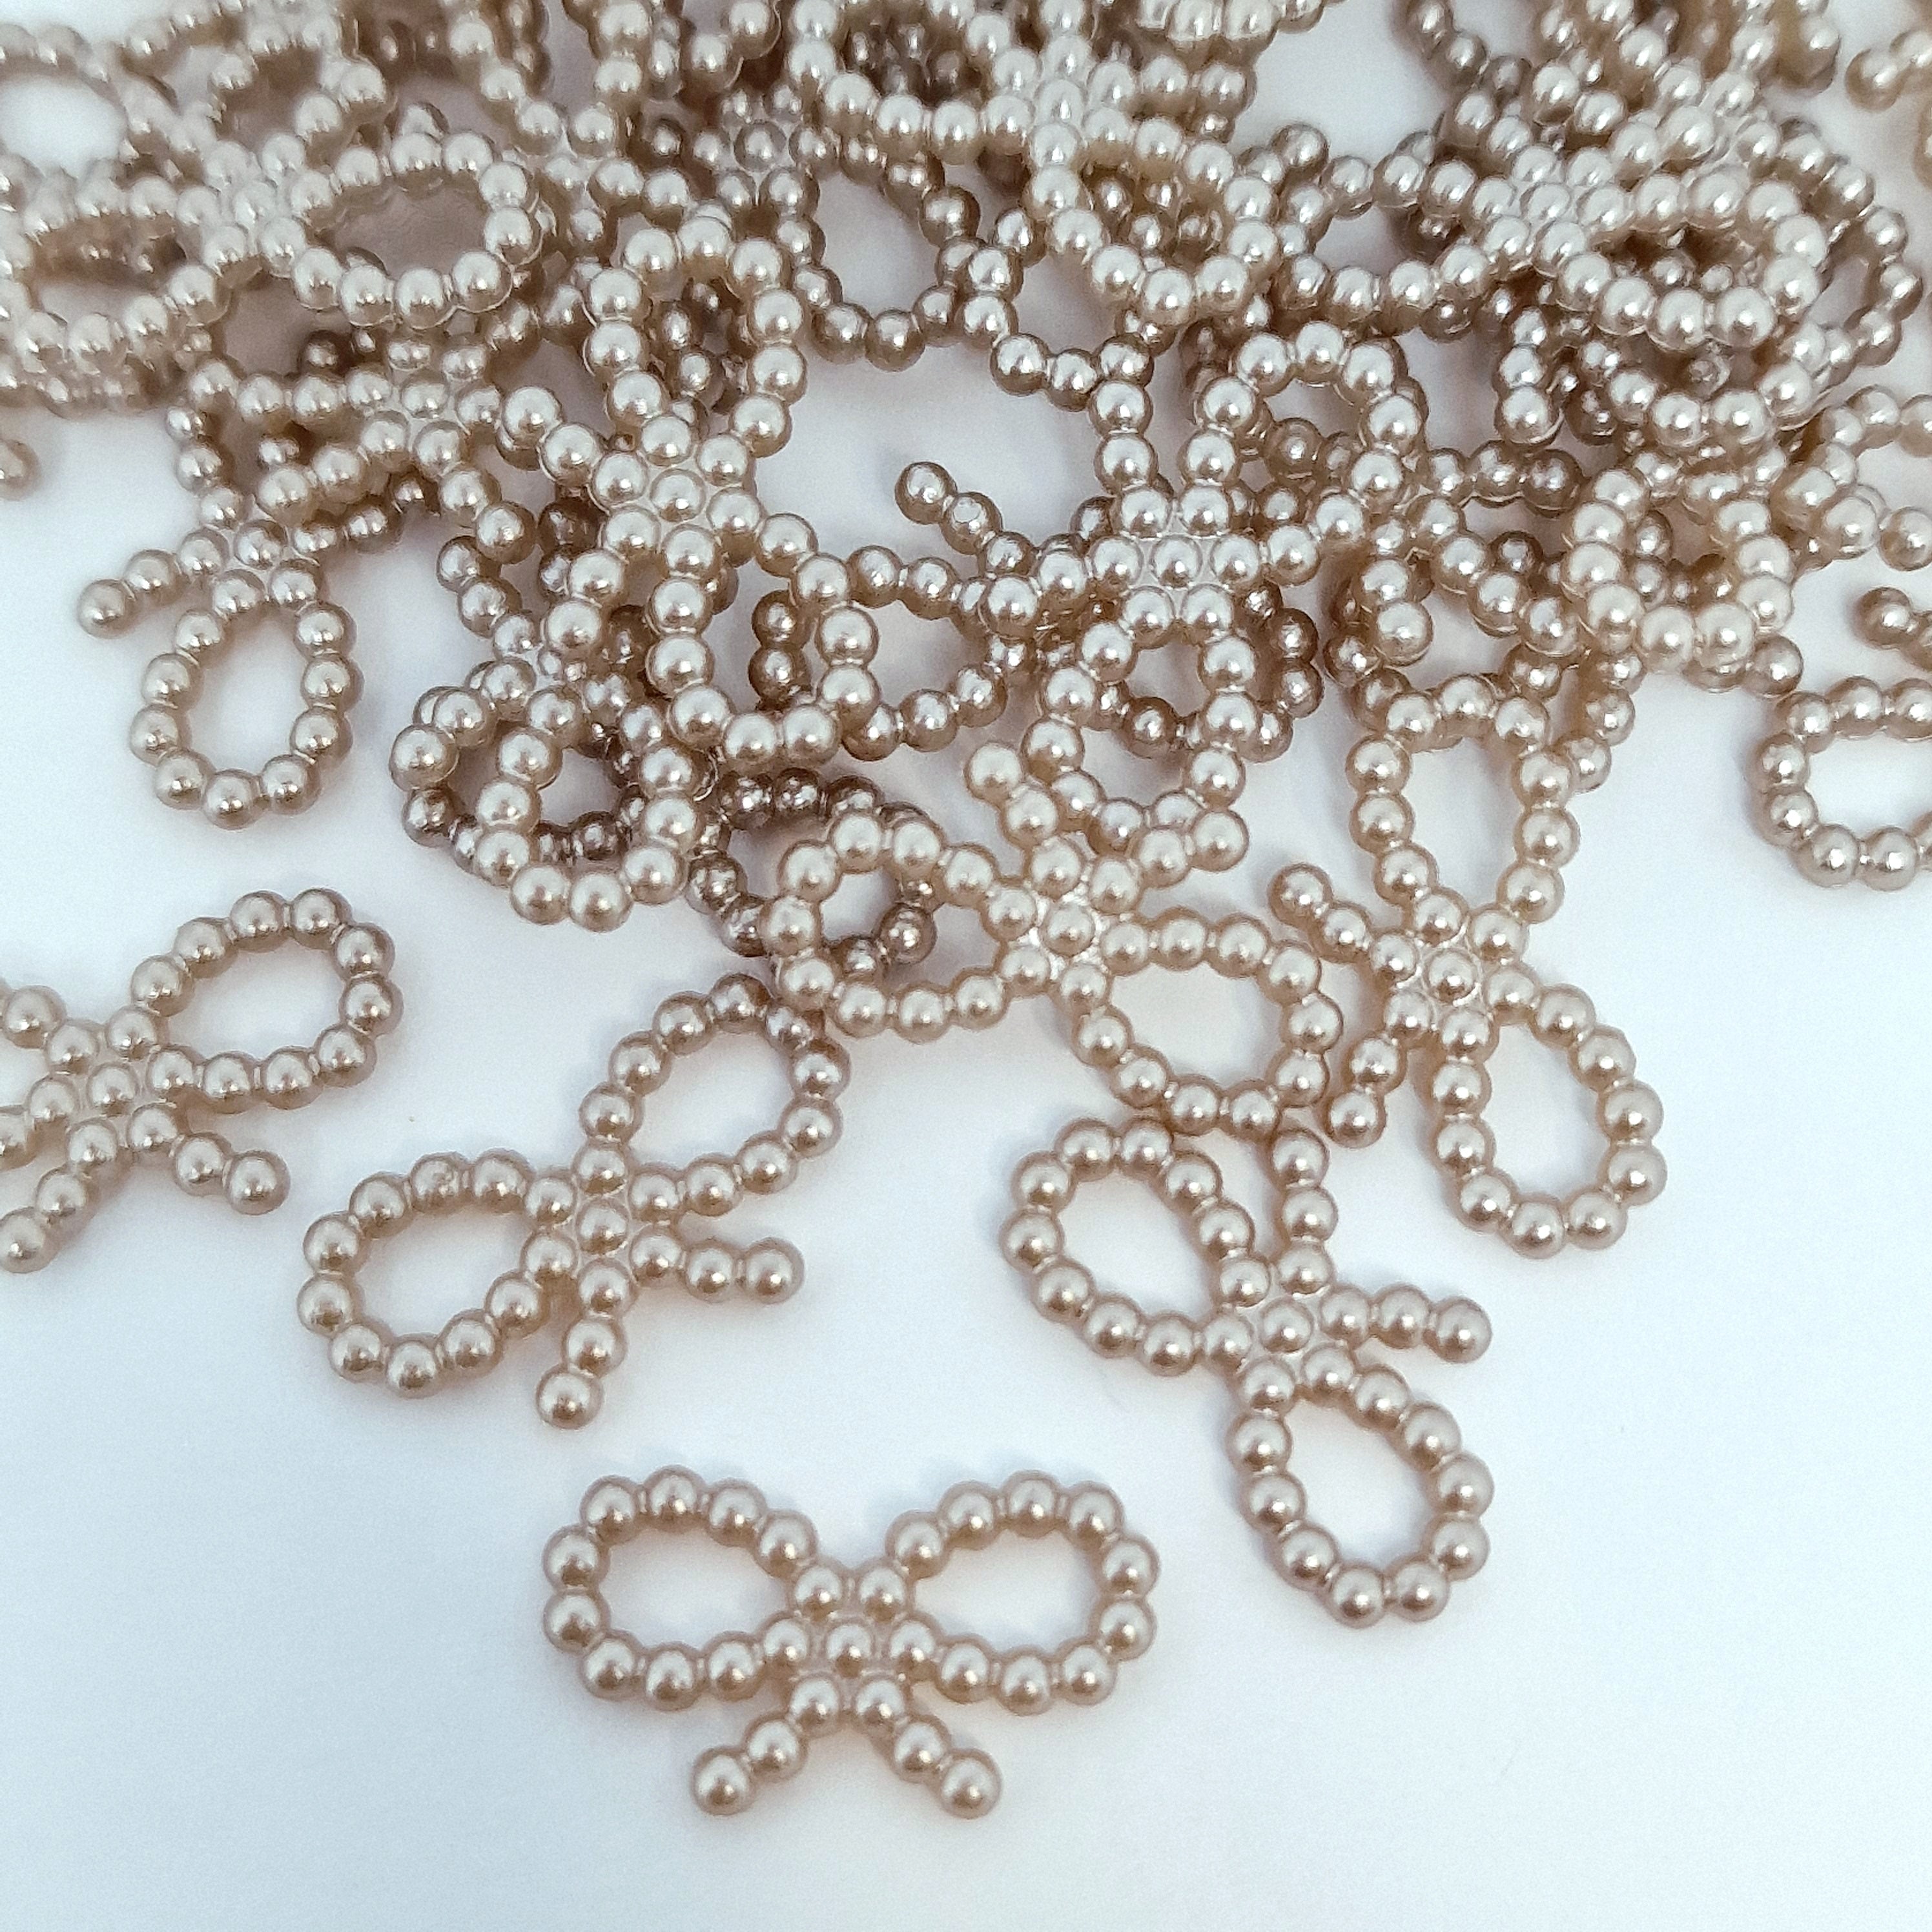 MajorCrafts 150pcs 18mm x 10mm Light Brown Hollow Bowknot Butterfly Resin Pearls